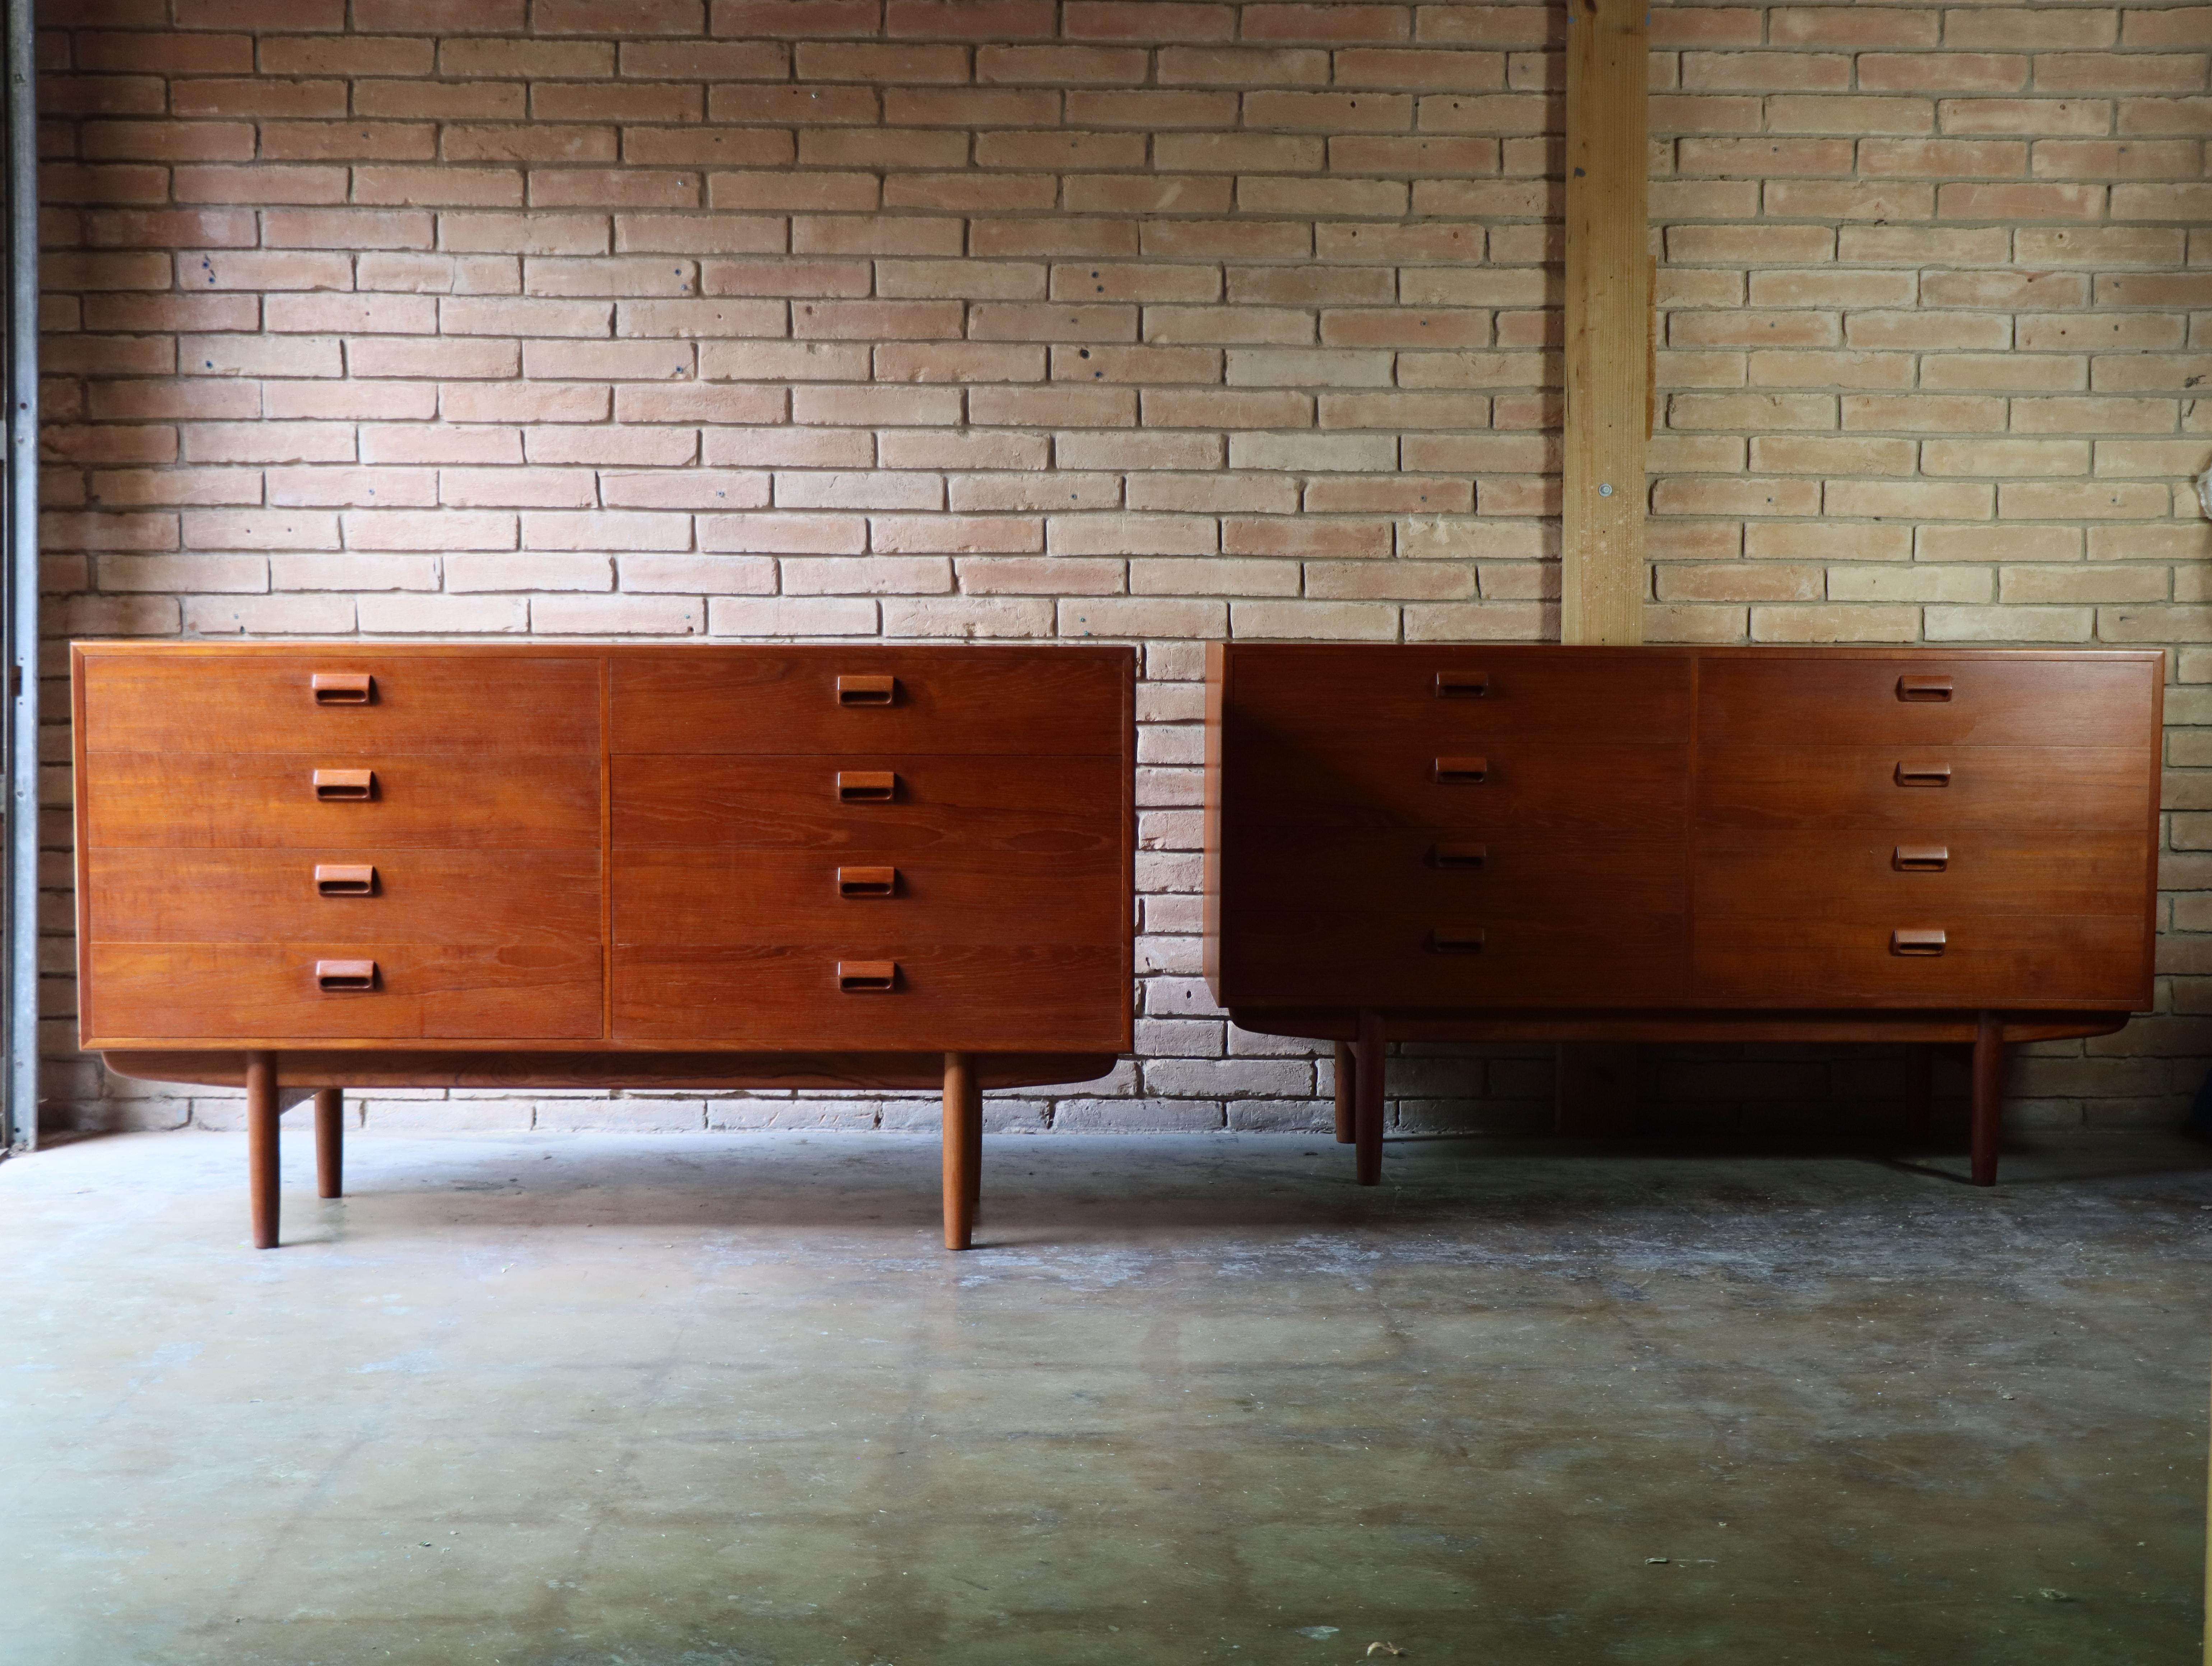 Pair of dressers by Borge Mogensen for Soborg, Denmark. Each dresser features 8 drawers with solid teak drawer pulls and bases. Executed old growth teak. 

One of Mogensen’s most notable designs, these dressers show off an excellent build quality